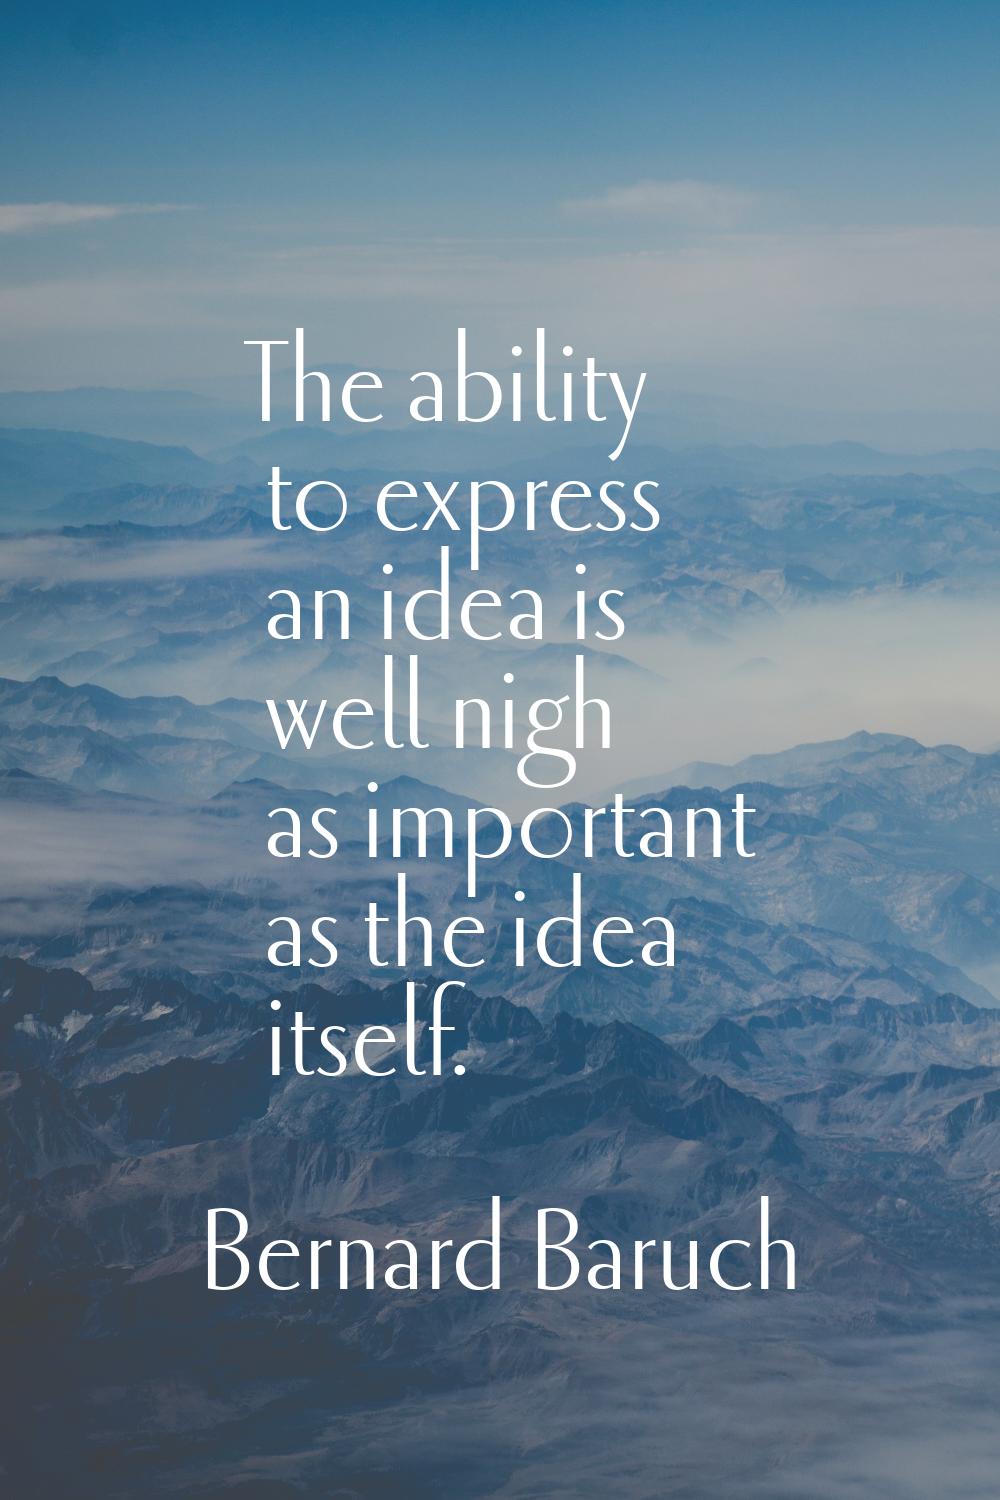 The ability to express an idea is well nigh as important as the idea itself.